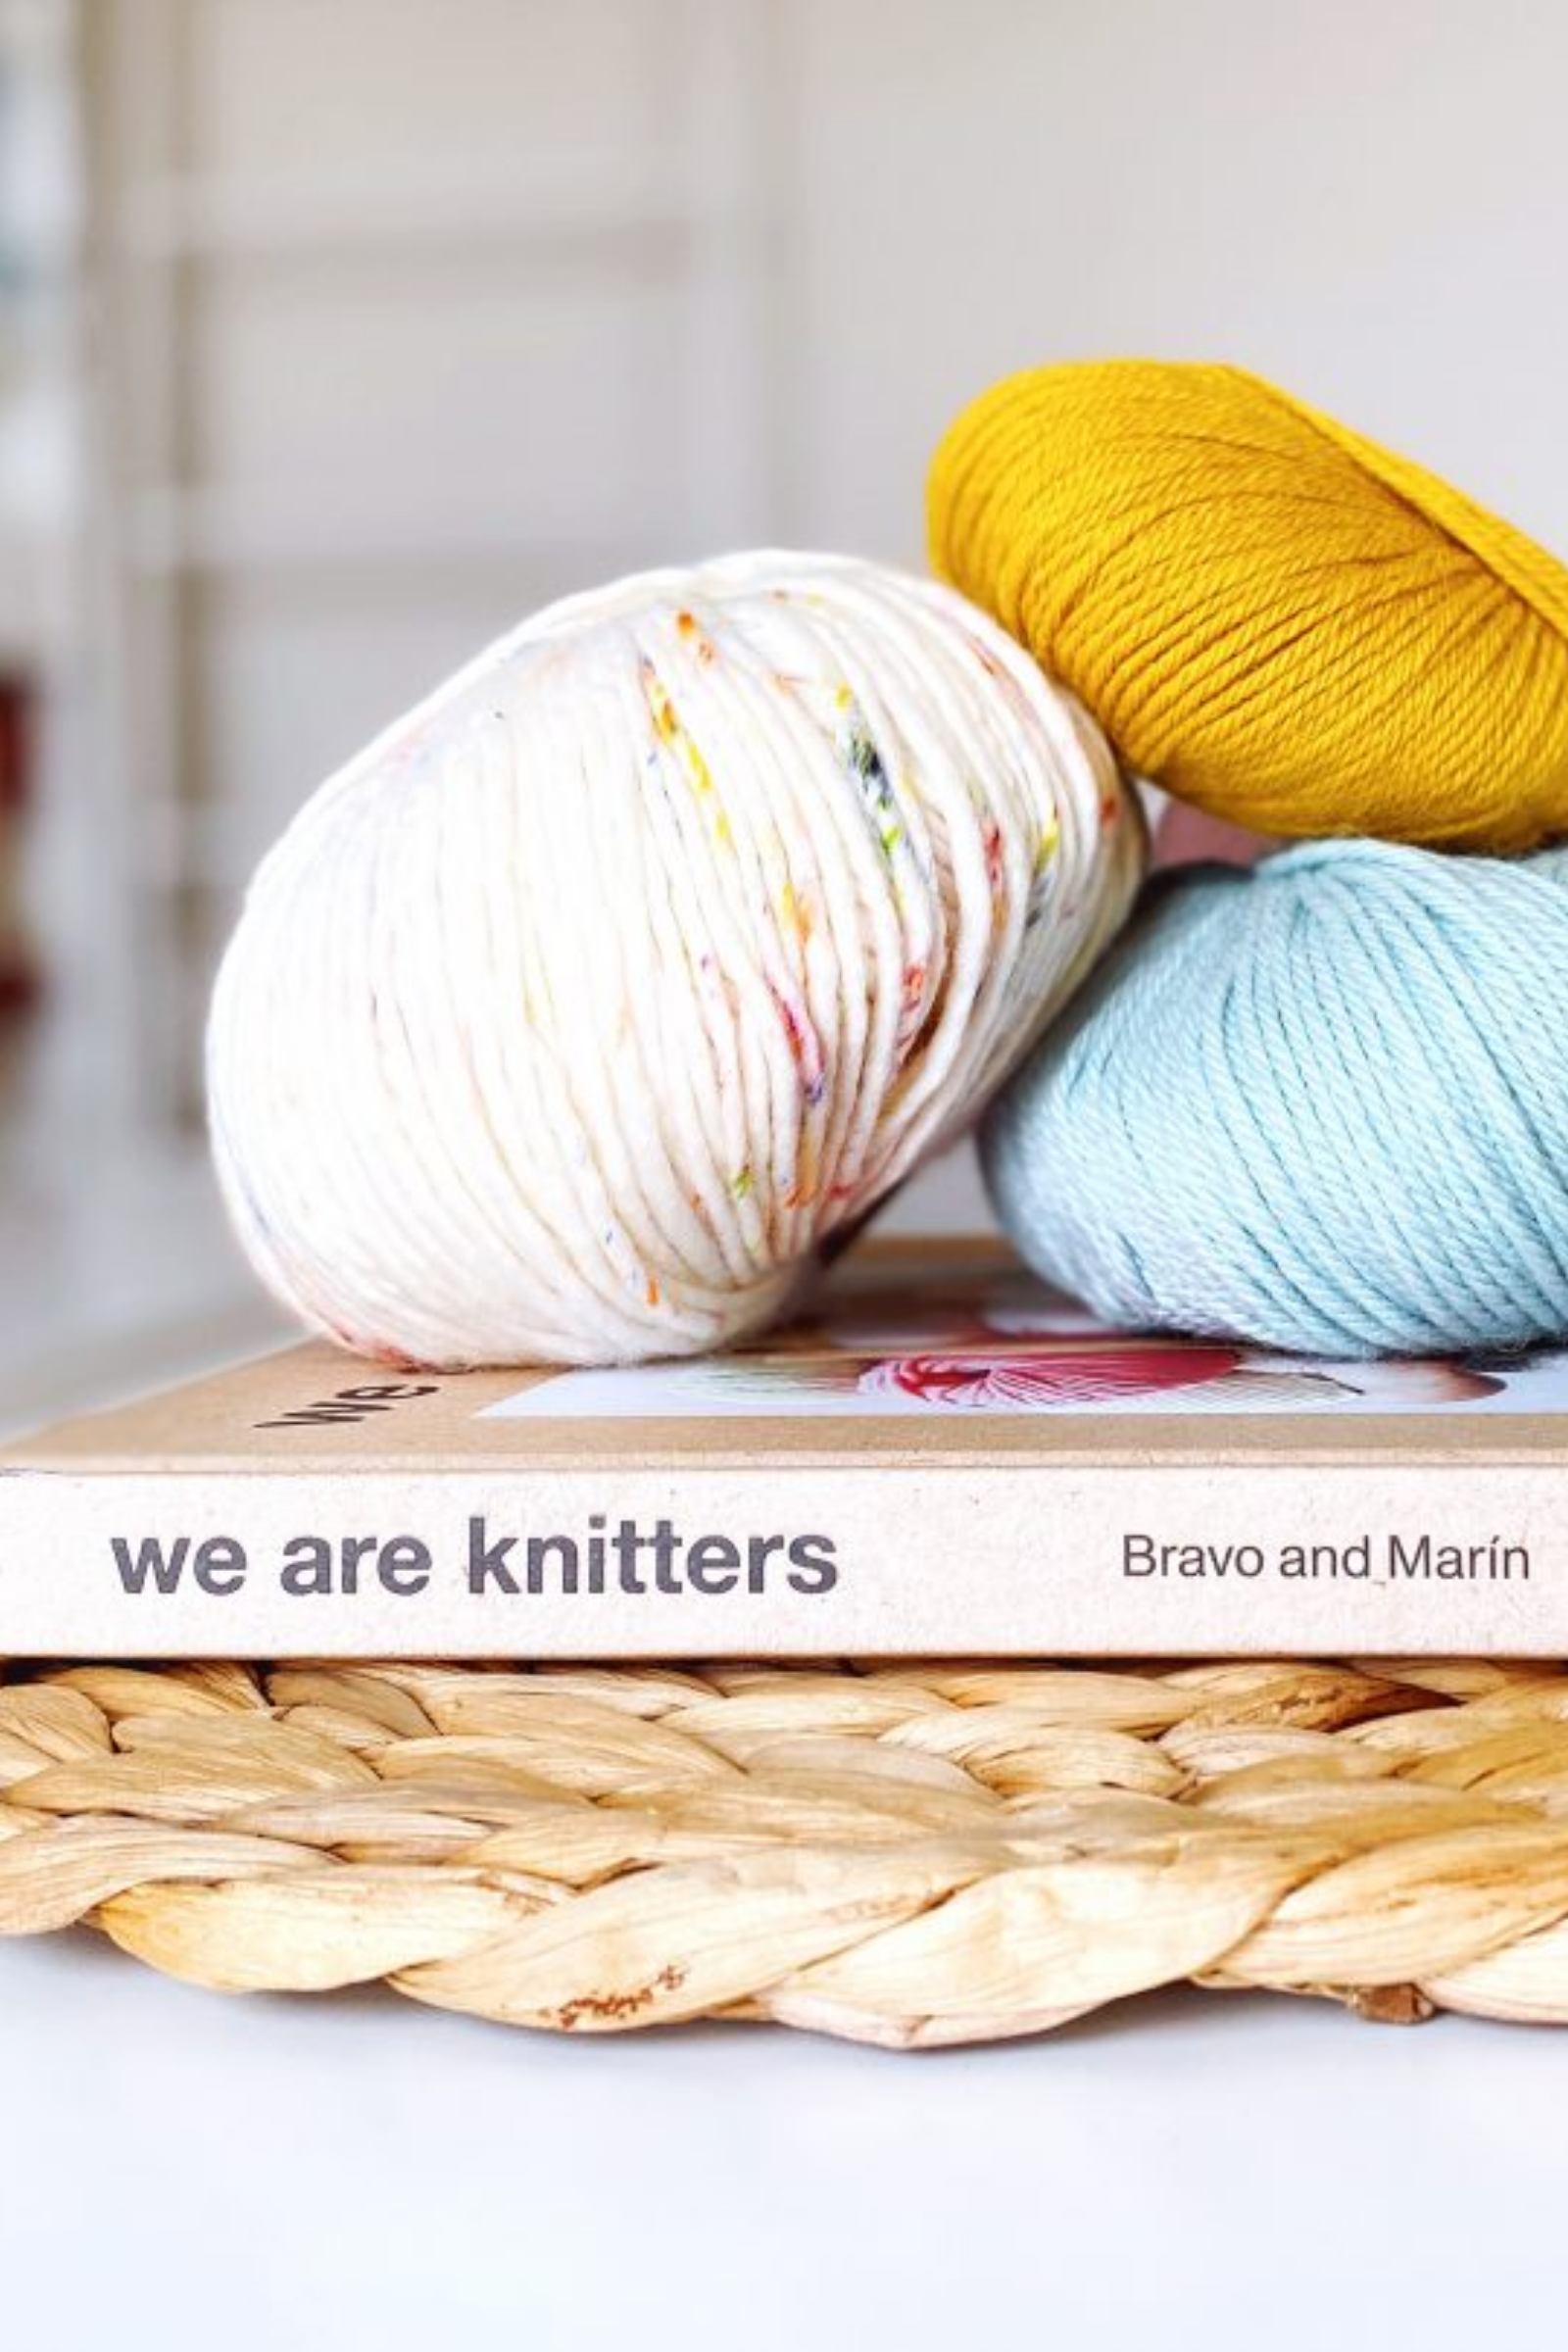 We are knitters